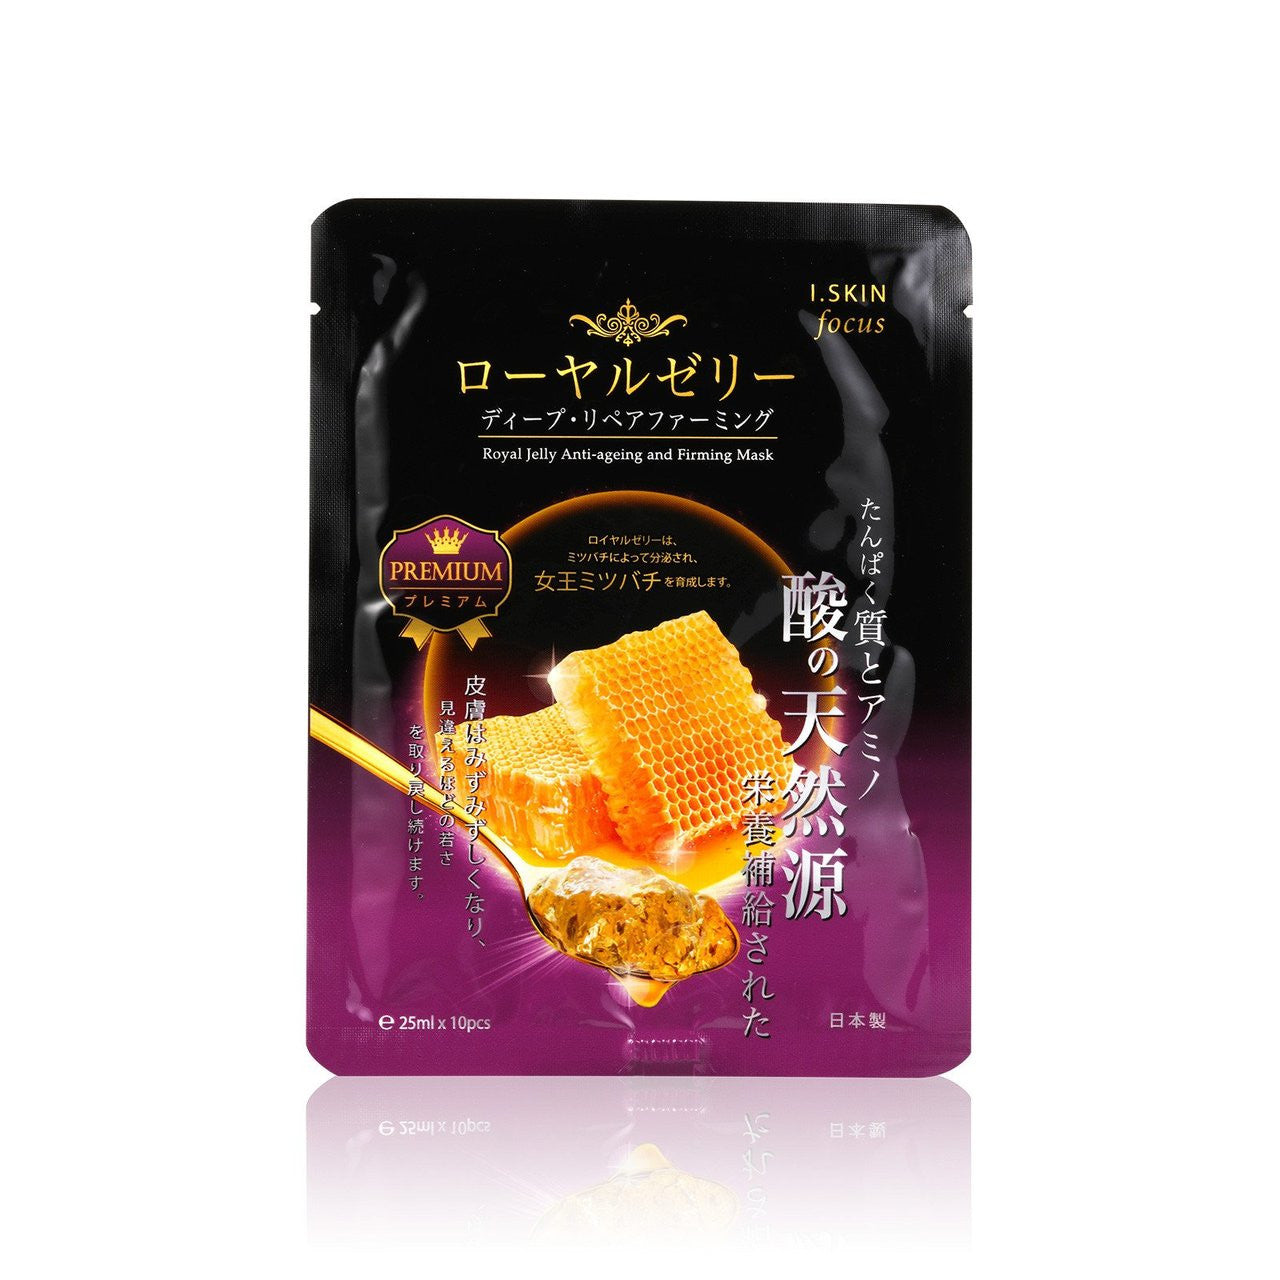 I.Skin focus Royal Jelly Anto-ageing and Firming Sheet Mask 1pc